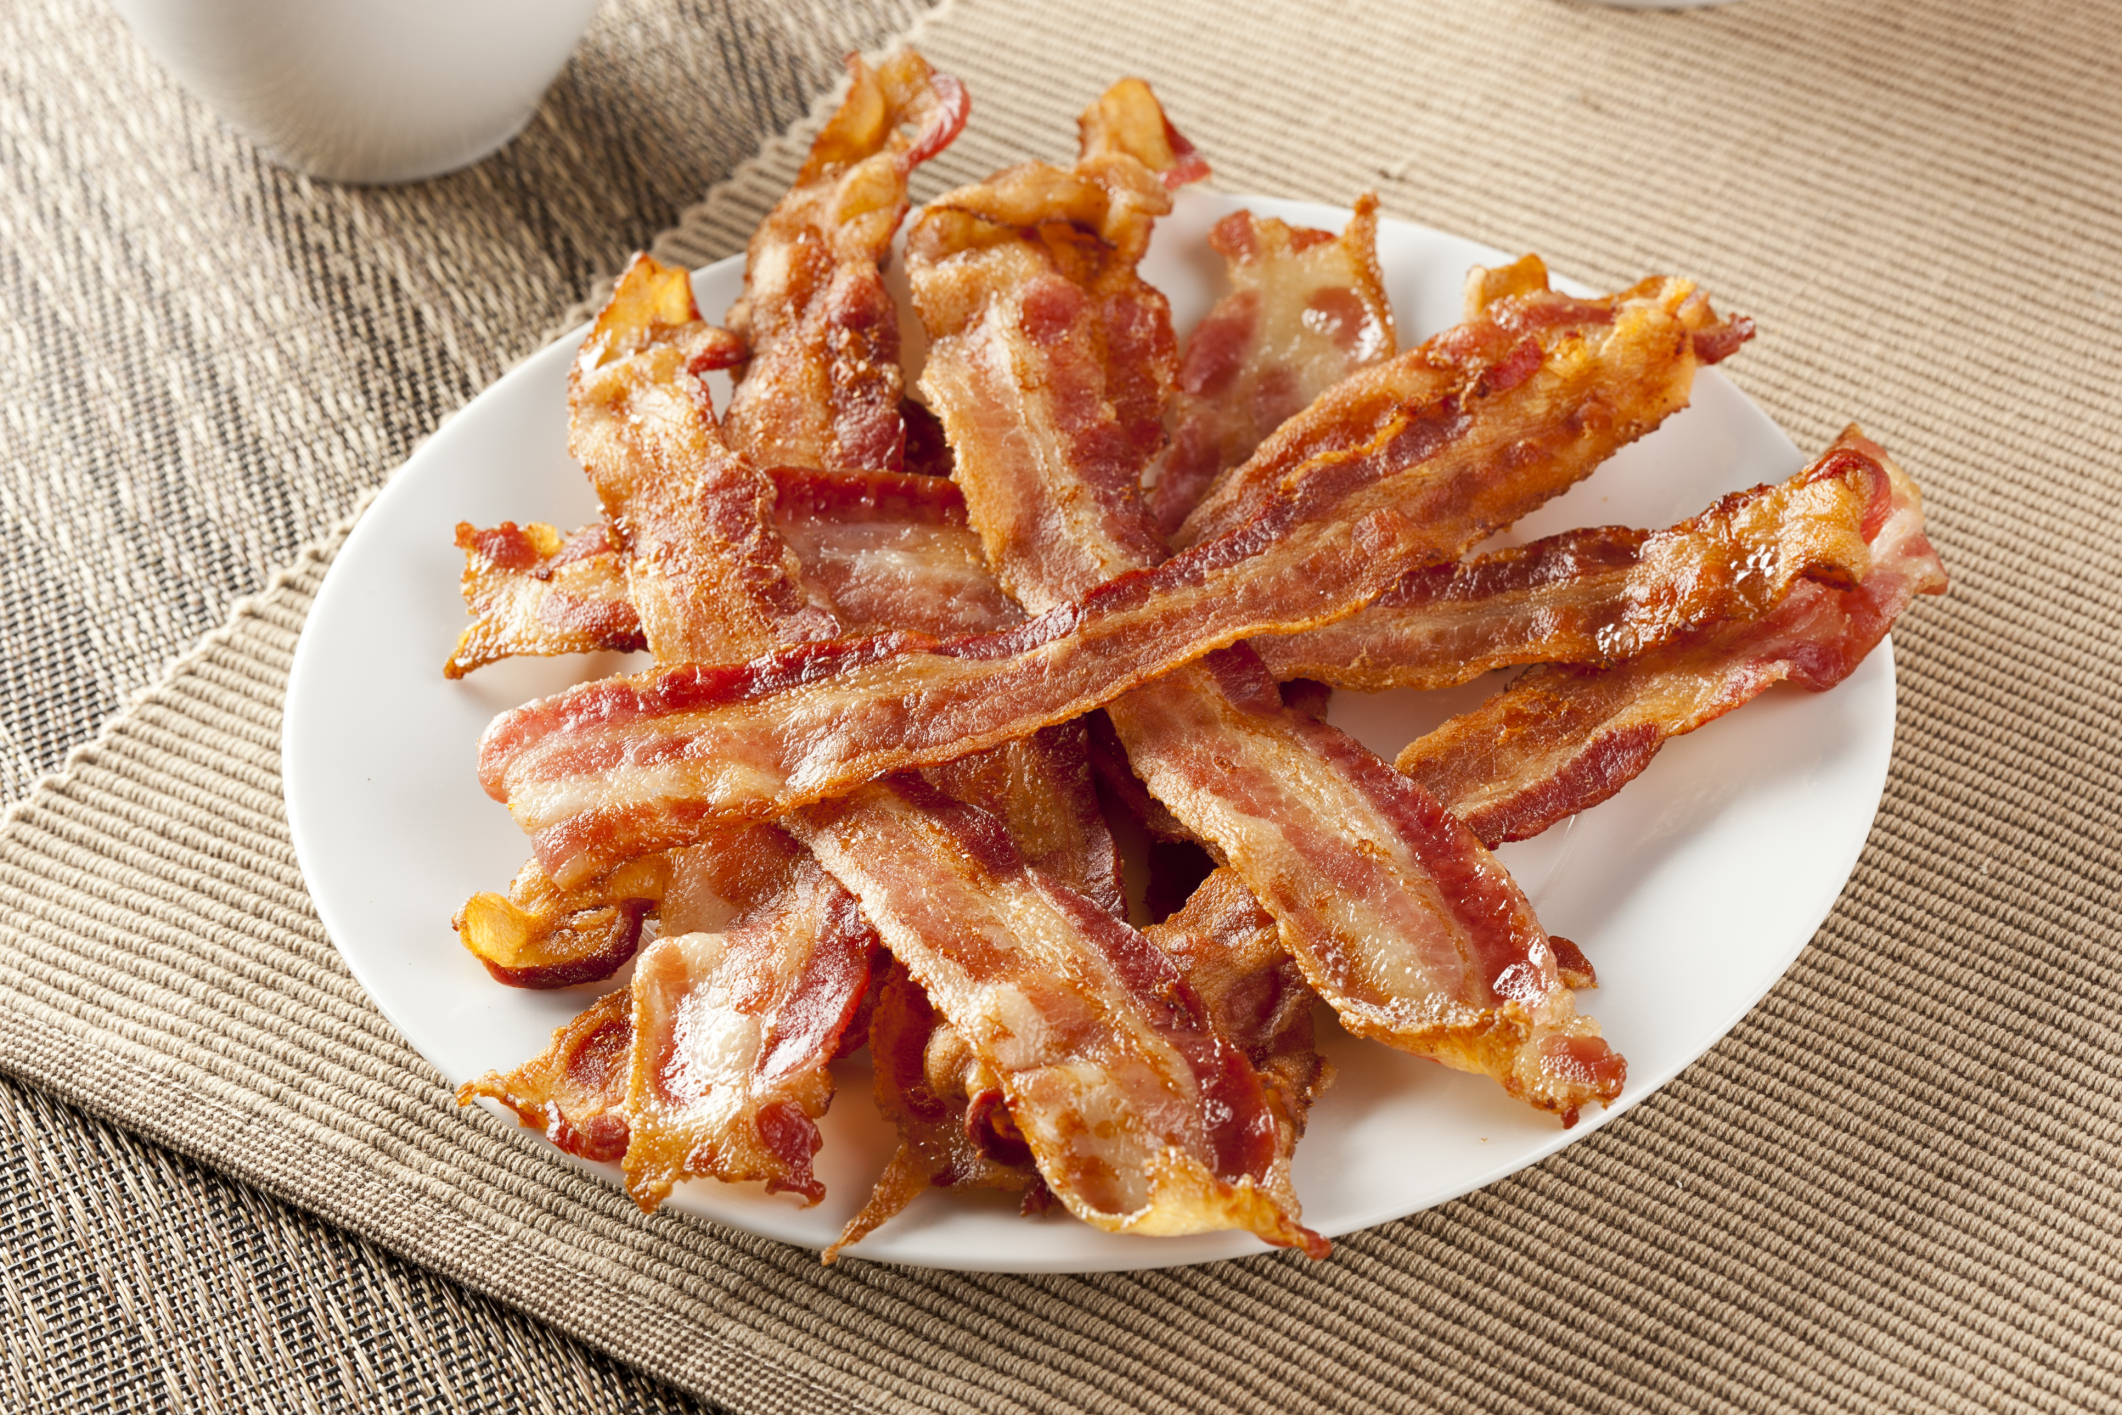 How Many Calories in a Strip of Bacon